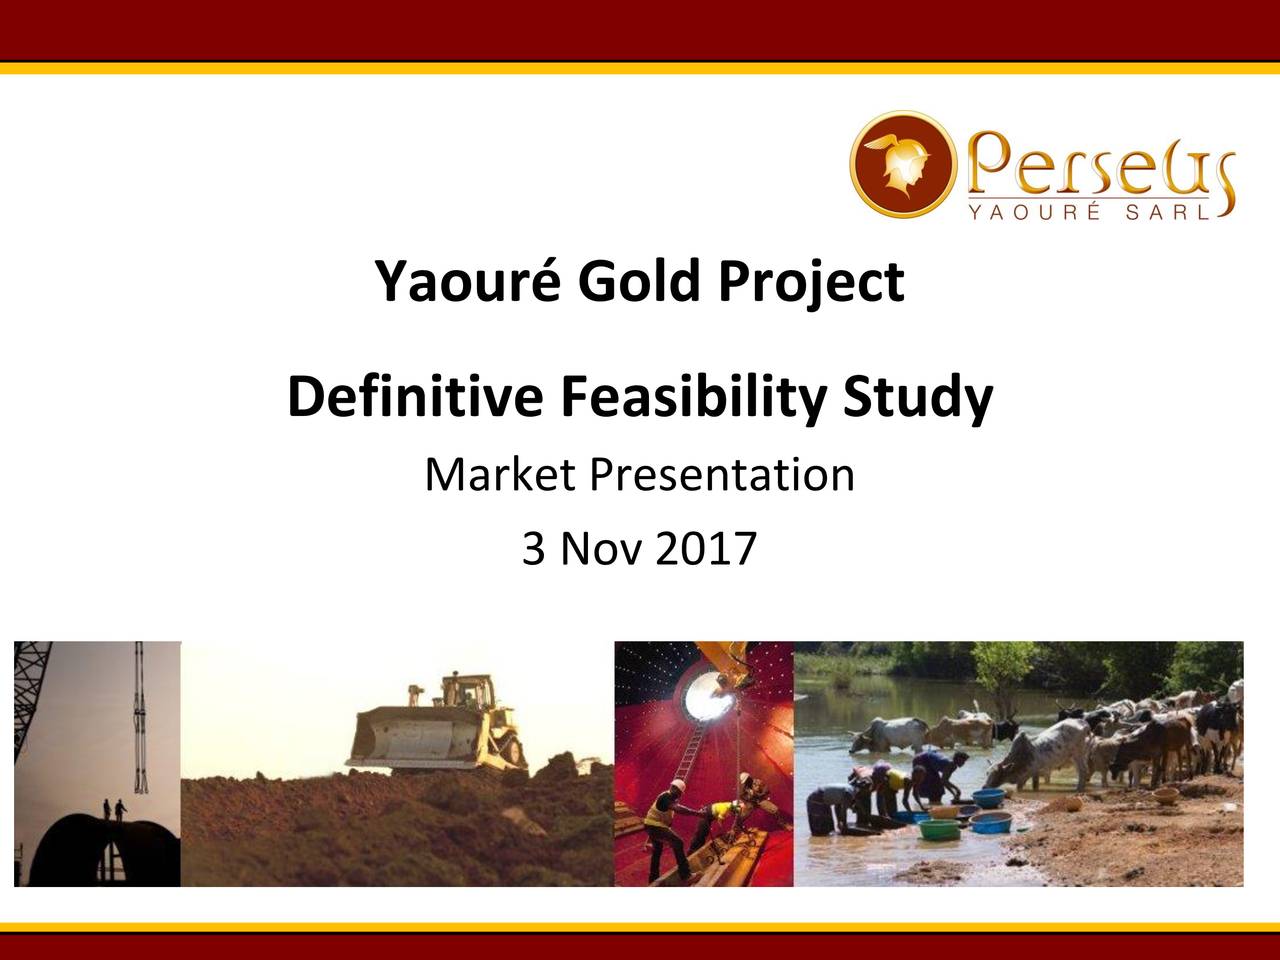 Yaouré Gold Project